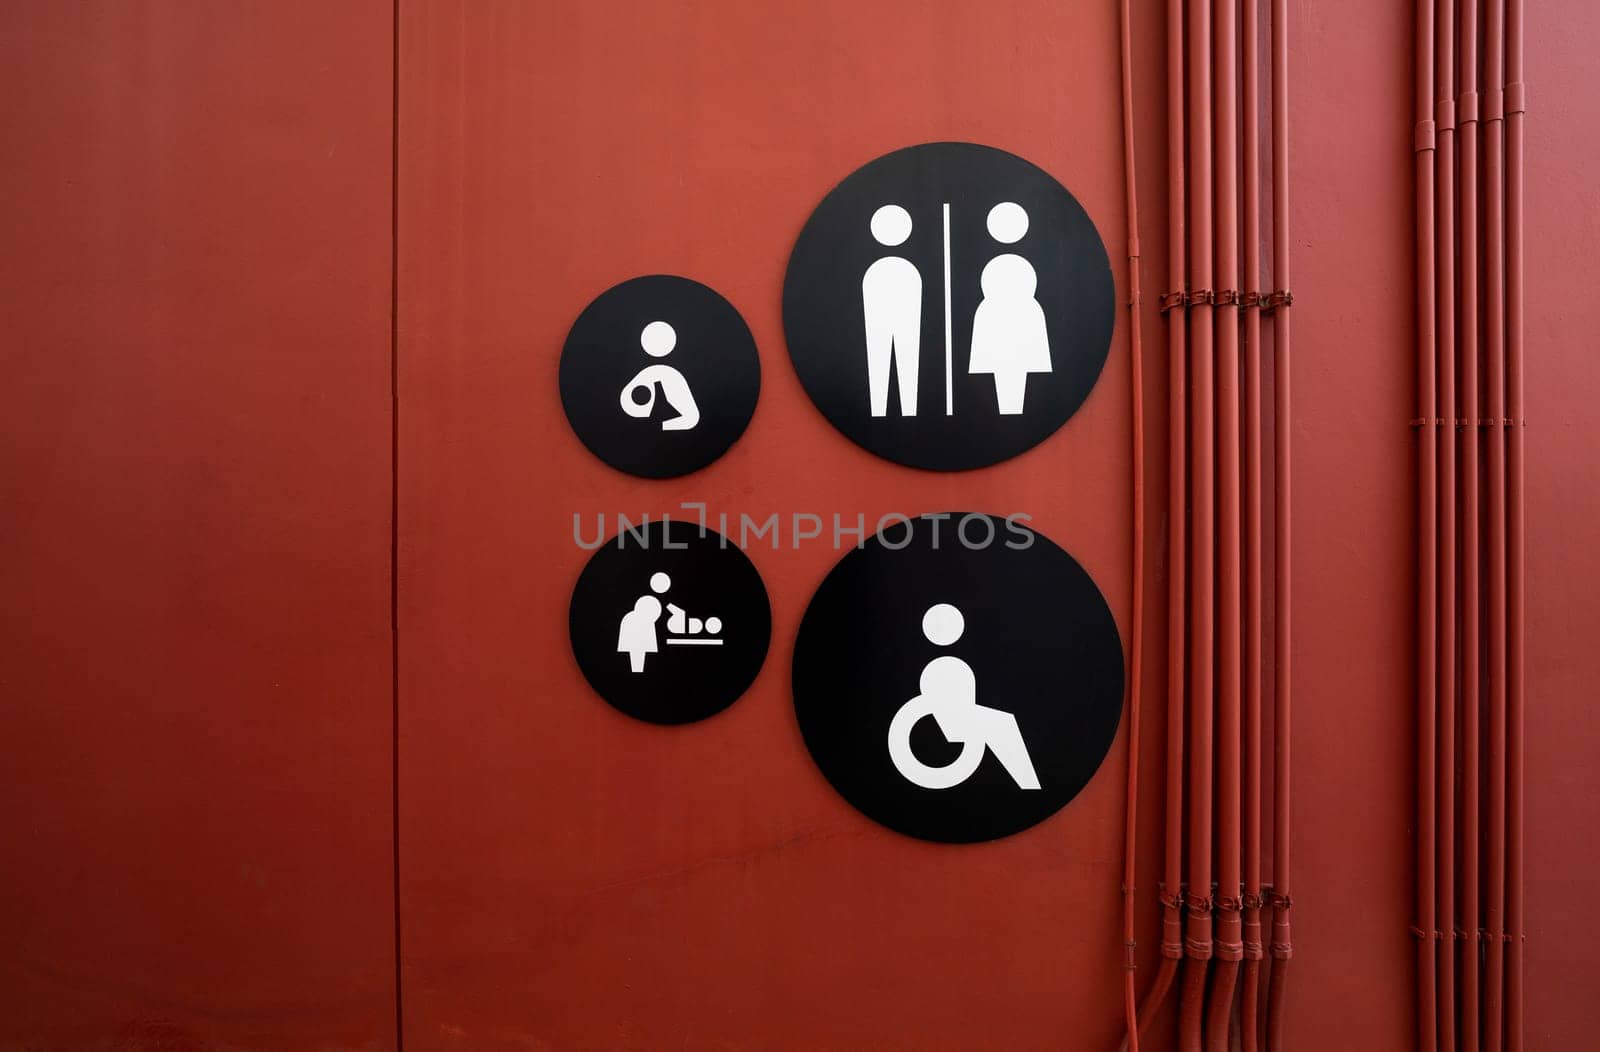 Public toilet sign. Woman, men, children, baby diaper changing, and disabled person toilet icon on restroom wall. Public restroom universal icon. Disabled access symbol. Latrine or WC. Washroom sign.